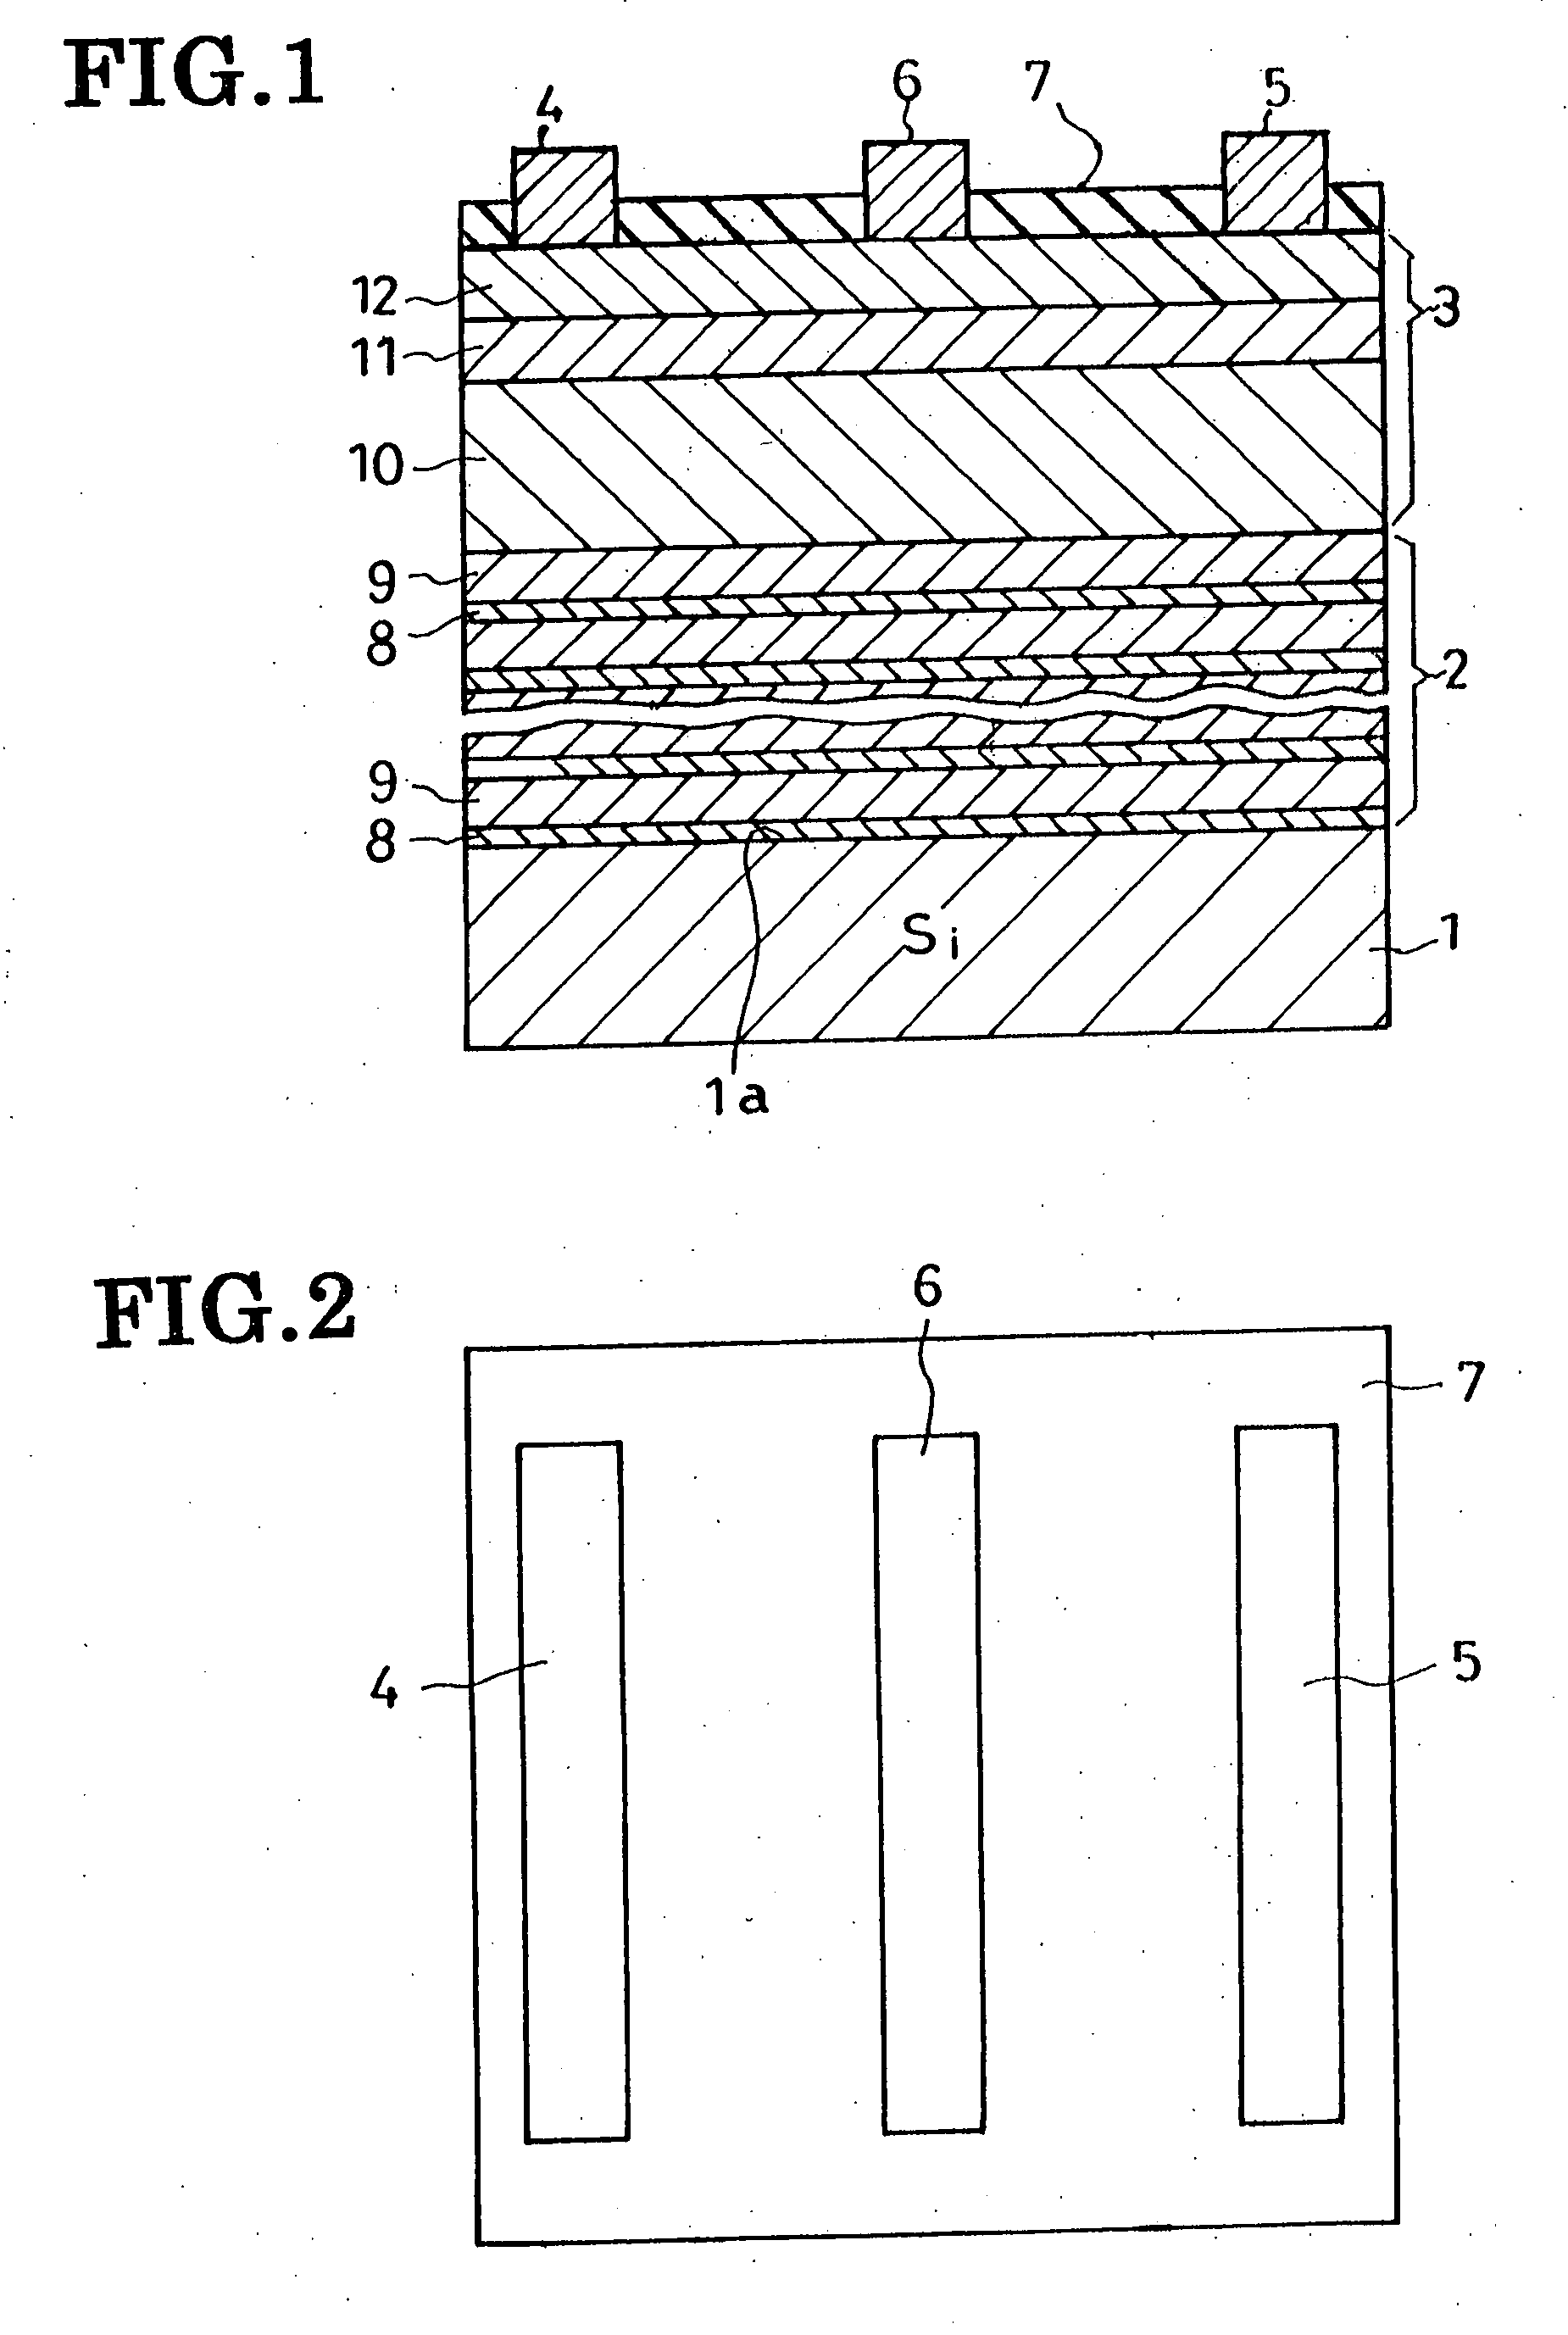 Semiconductor device with reduced leakage current, and method of fabrication